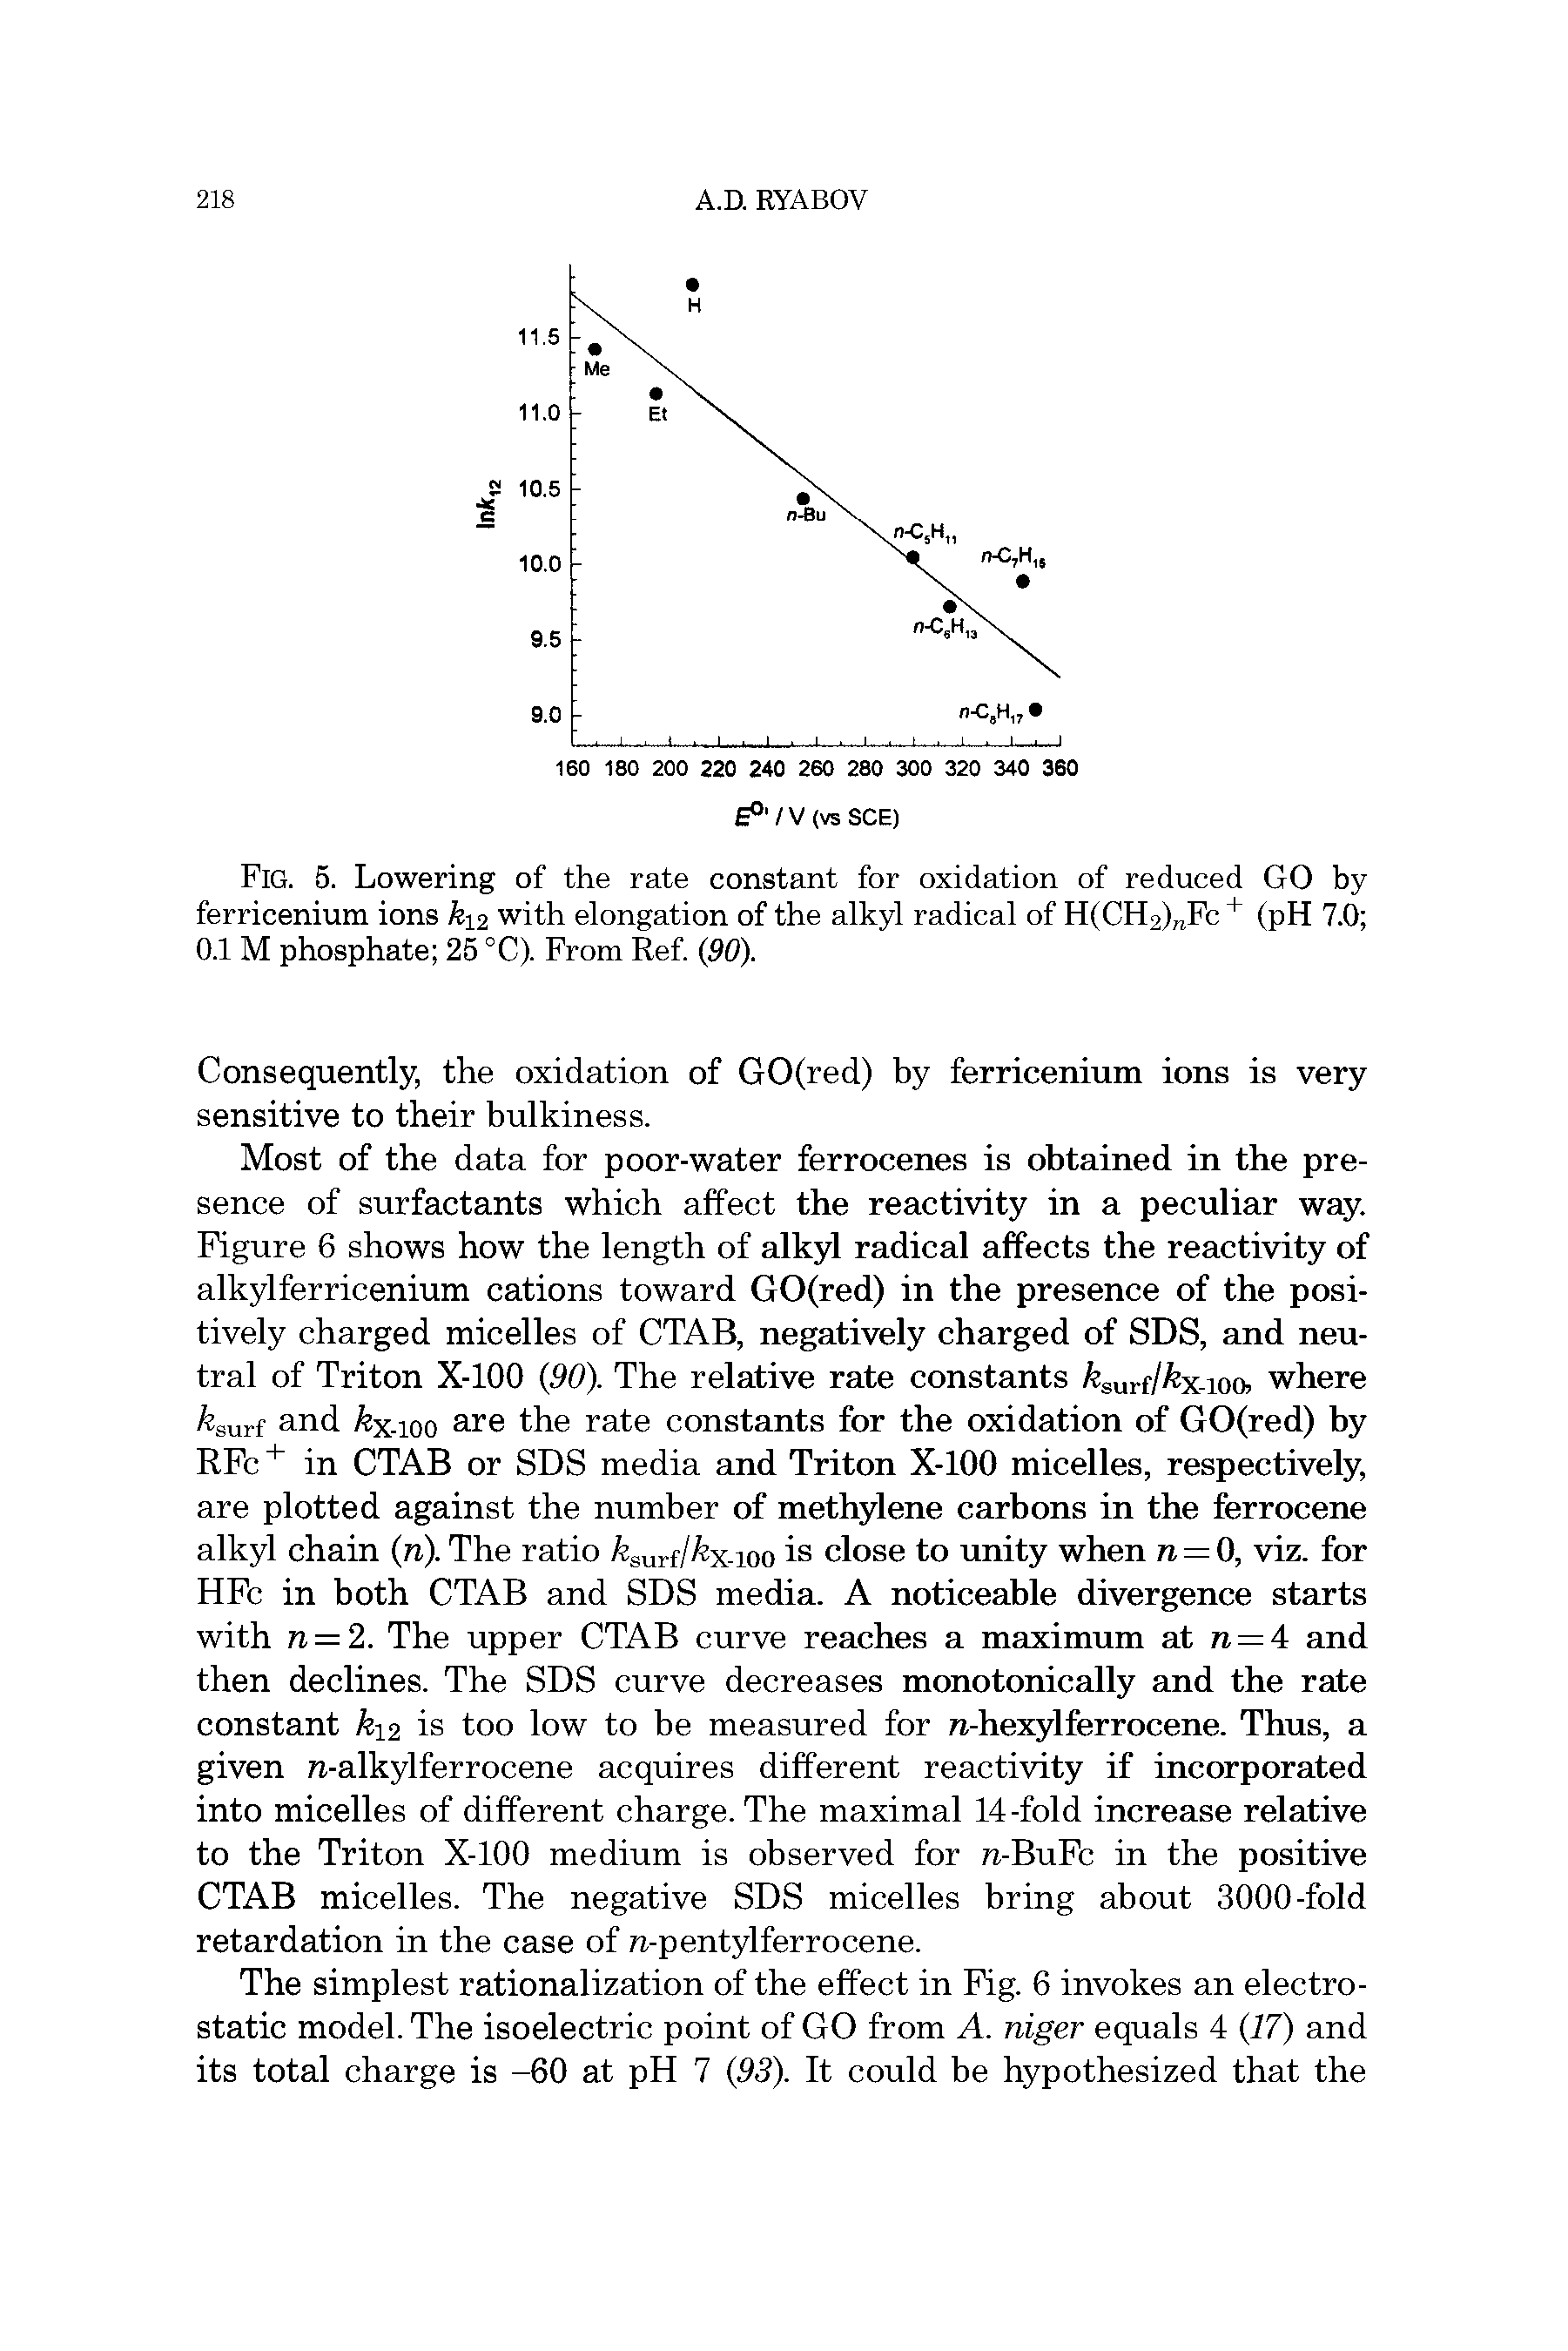 Fig. 5. Lowering of the rate constant for oxidation of reduced GO by ferricenium ions ki2 with elongation of the alkyl radical of H(CH2) Fc + (pH 7.0 0.1 M phosphate 25 °C). From Ref. (90).